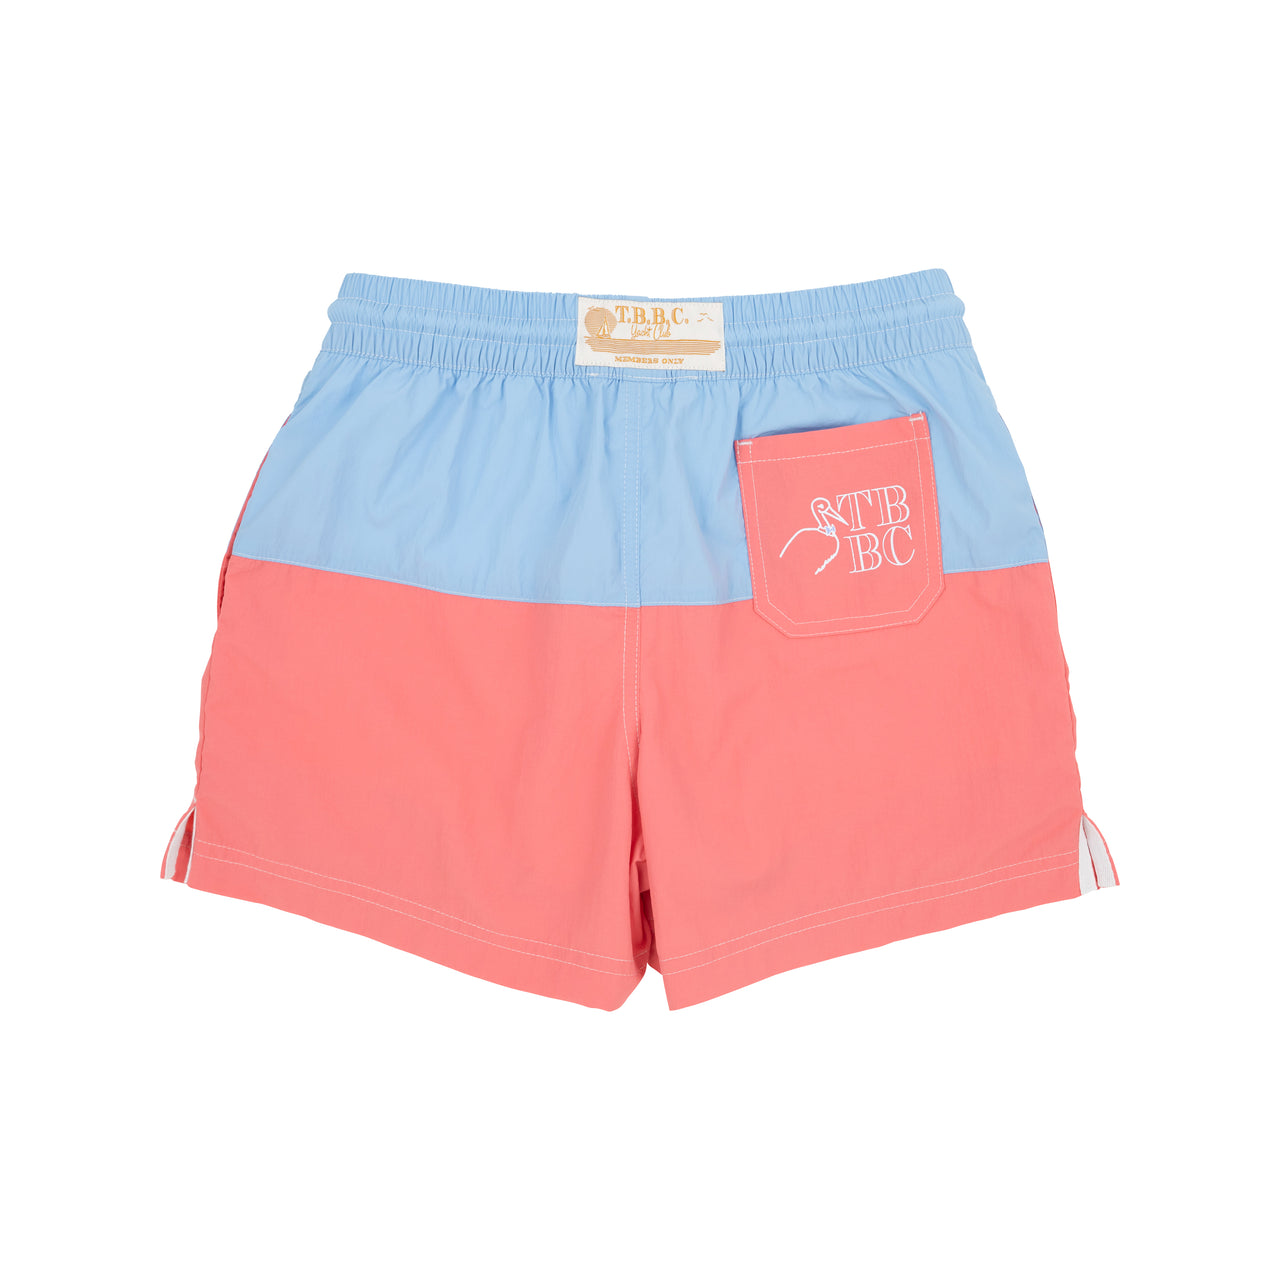 Country Club Colorblock Trunk | Beale Street Blue & Parrot Cay Coral With T.B.B.C. Pocket